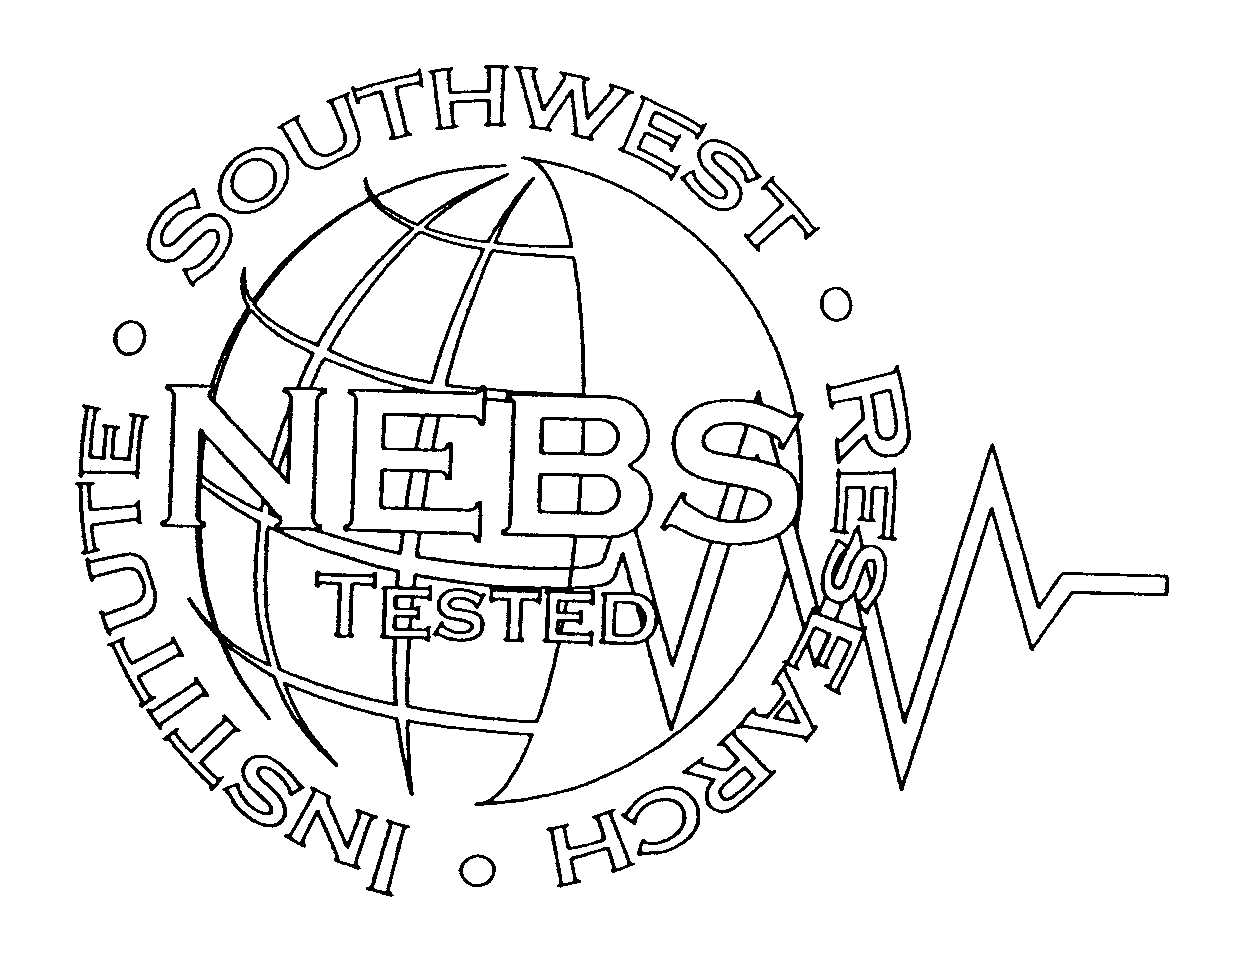  SOUTHWEST RESEARCH INSTITUTE NEBS TESTED